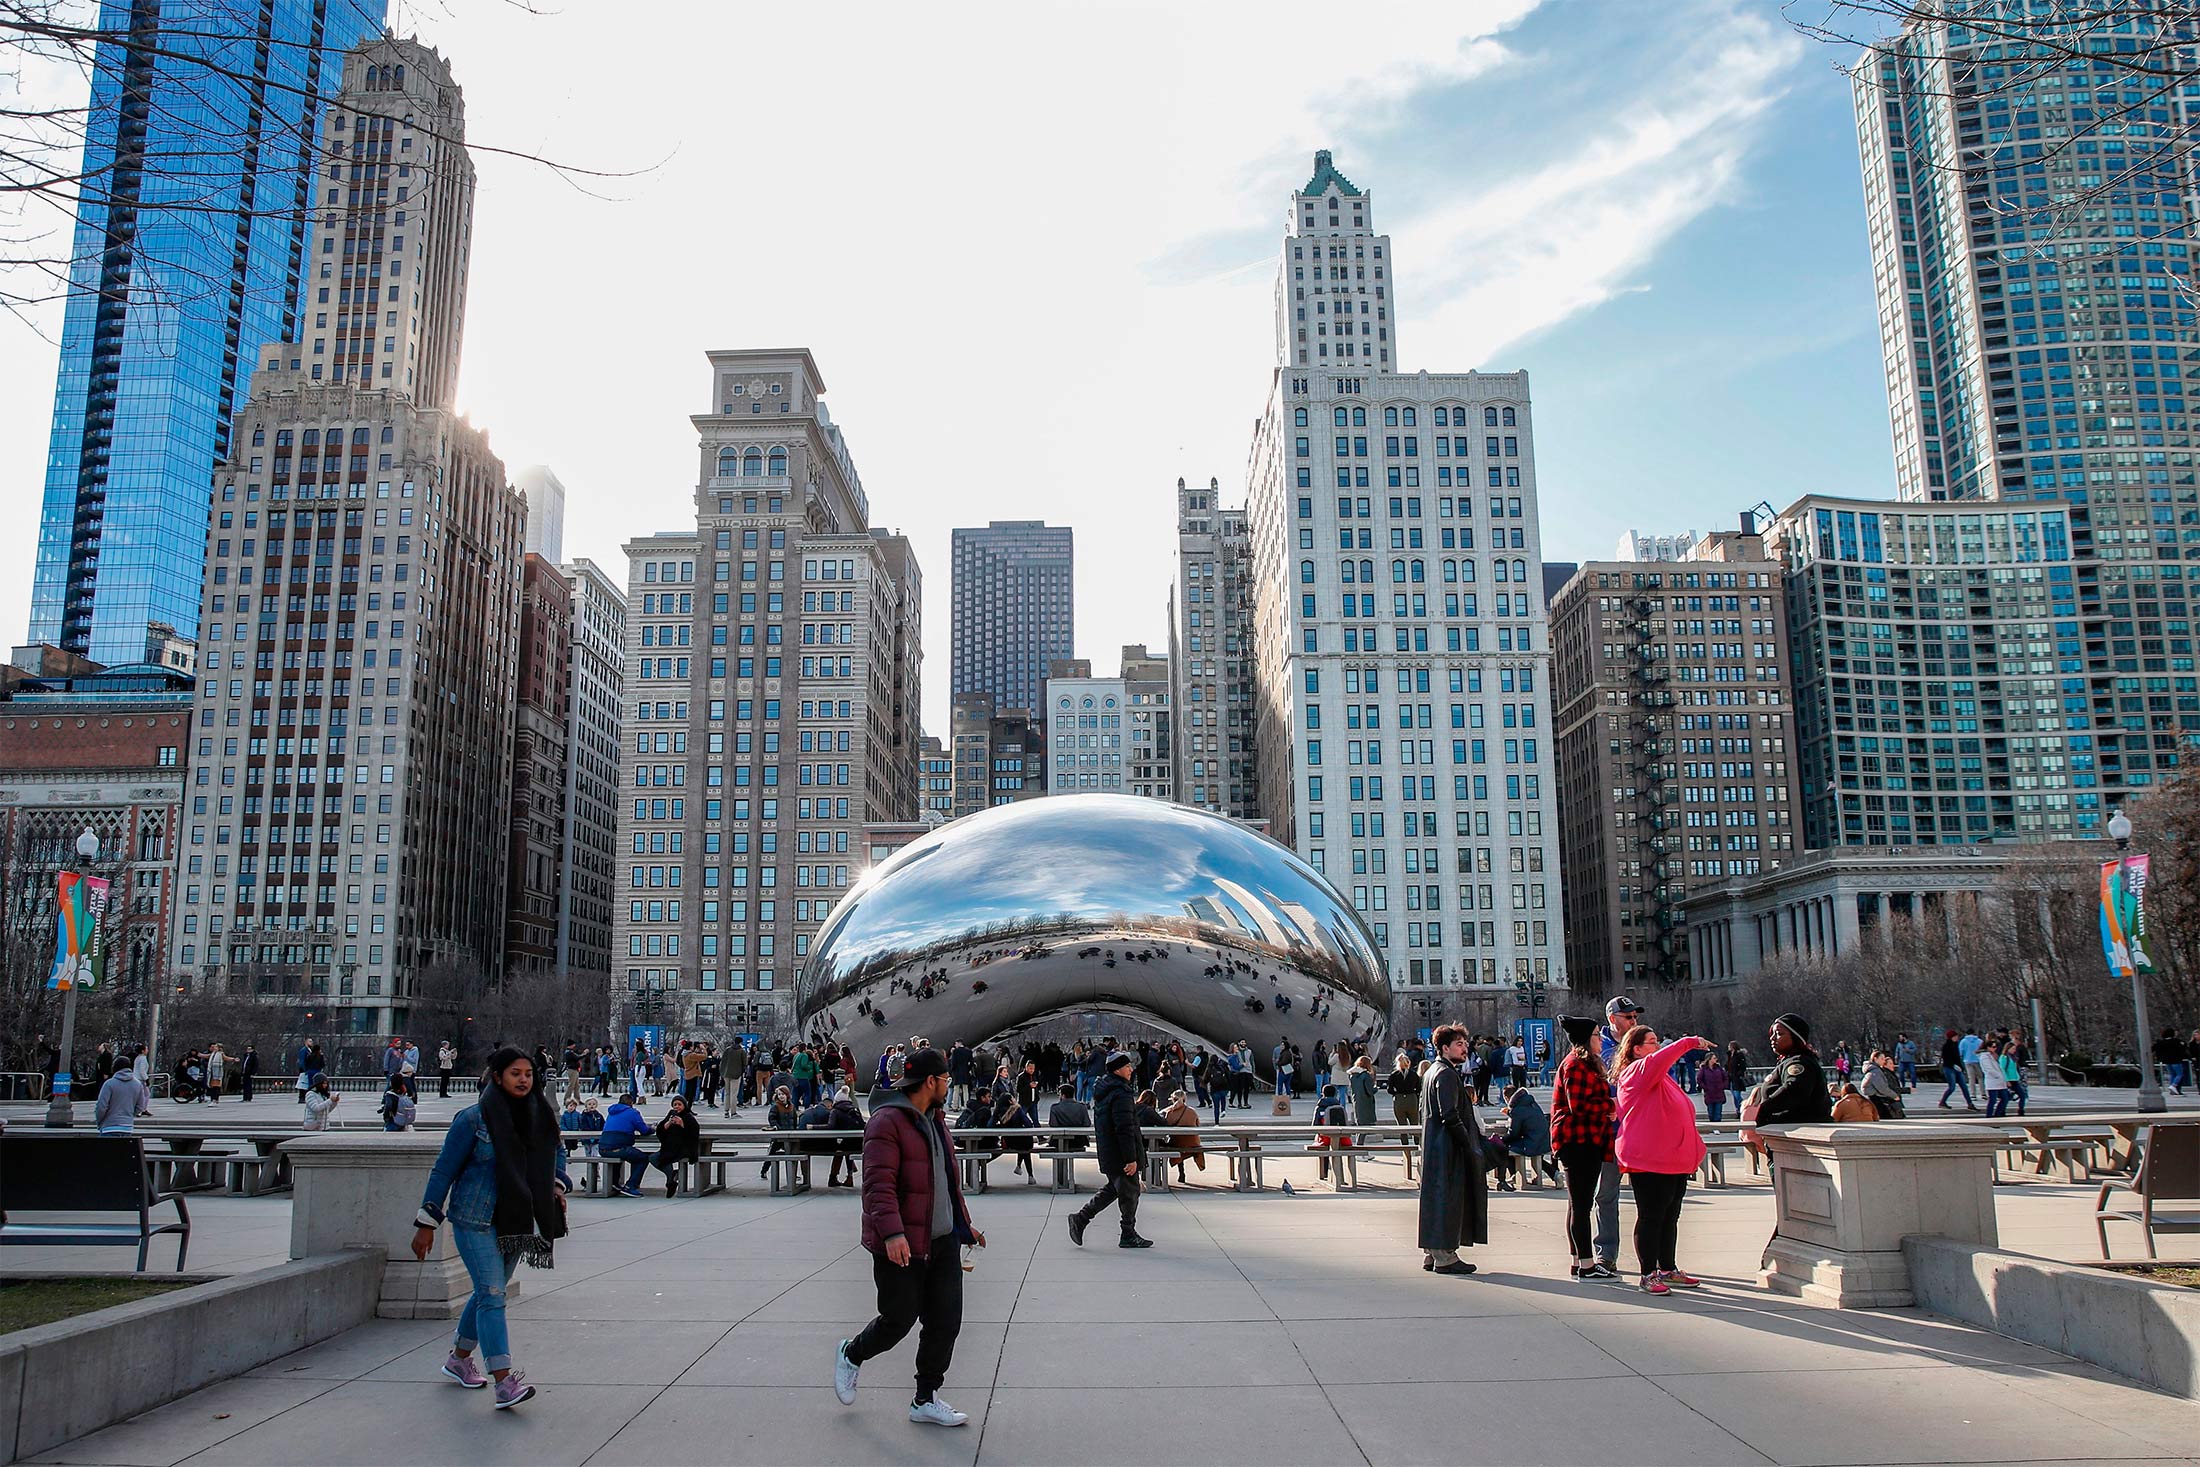 The “Bean” statue in Chicago’s&nbsp;Millennium Park, where a curfew on unaccompanied minors remains in place following a May homicide.